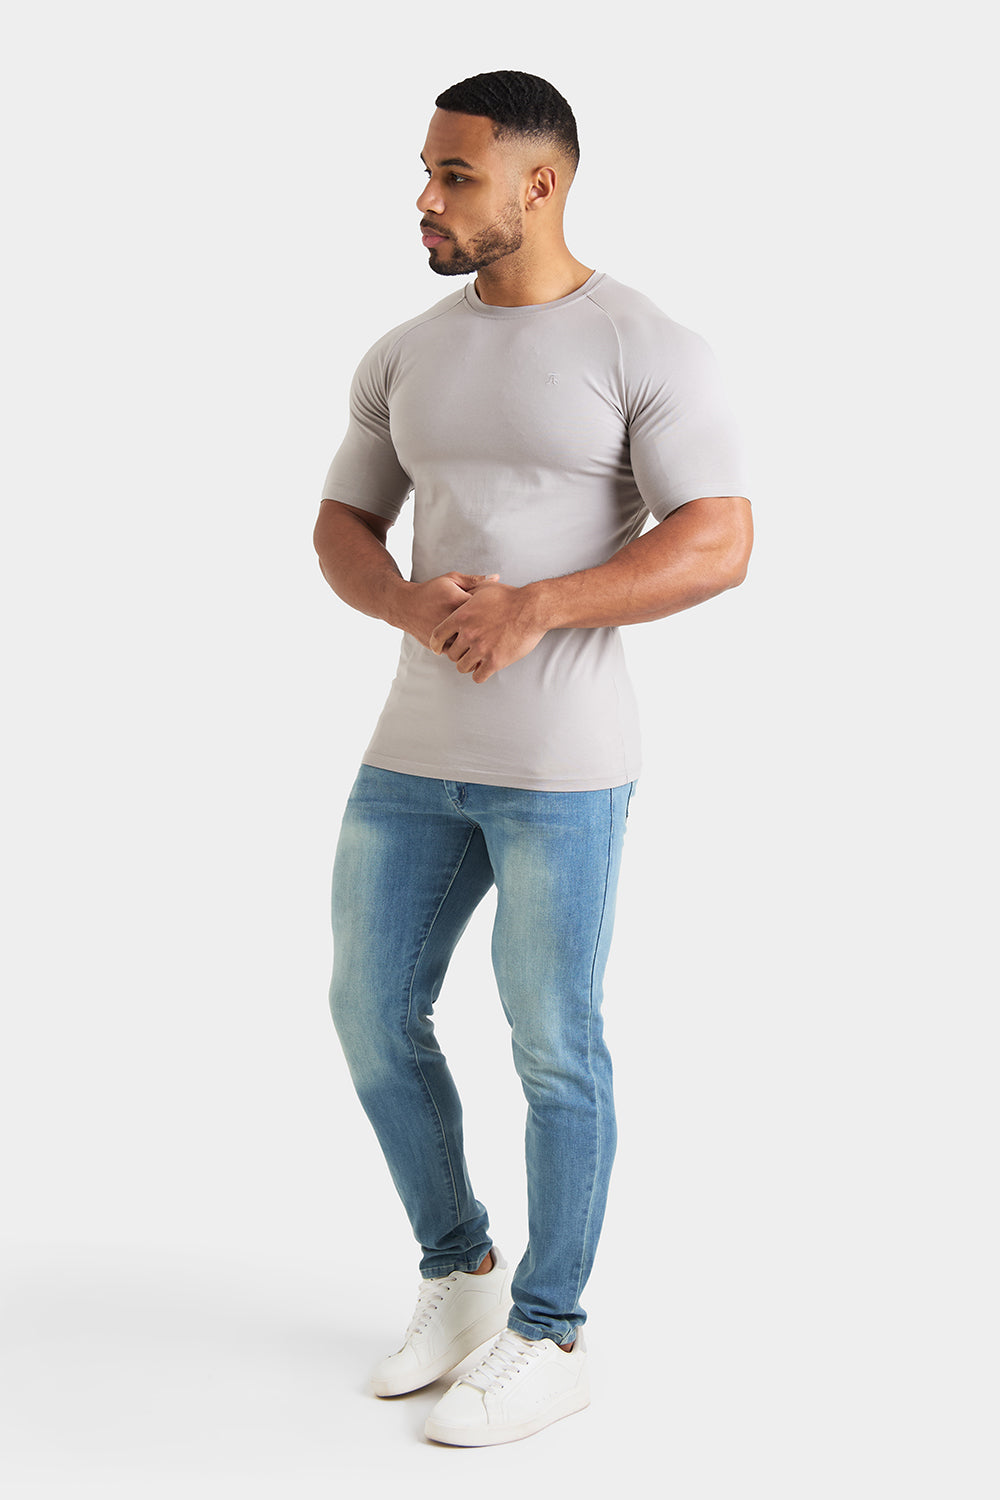 Longer Sleeve Muscle Fit T-Shirt in Mole - TAILORED ATHLETE - ROW